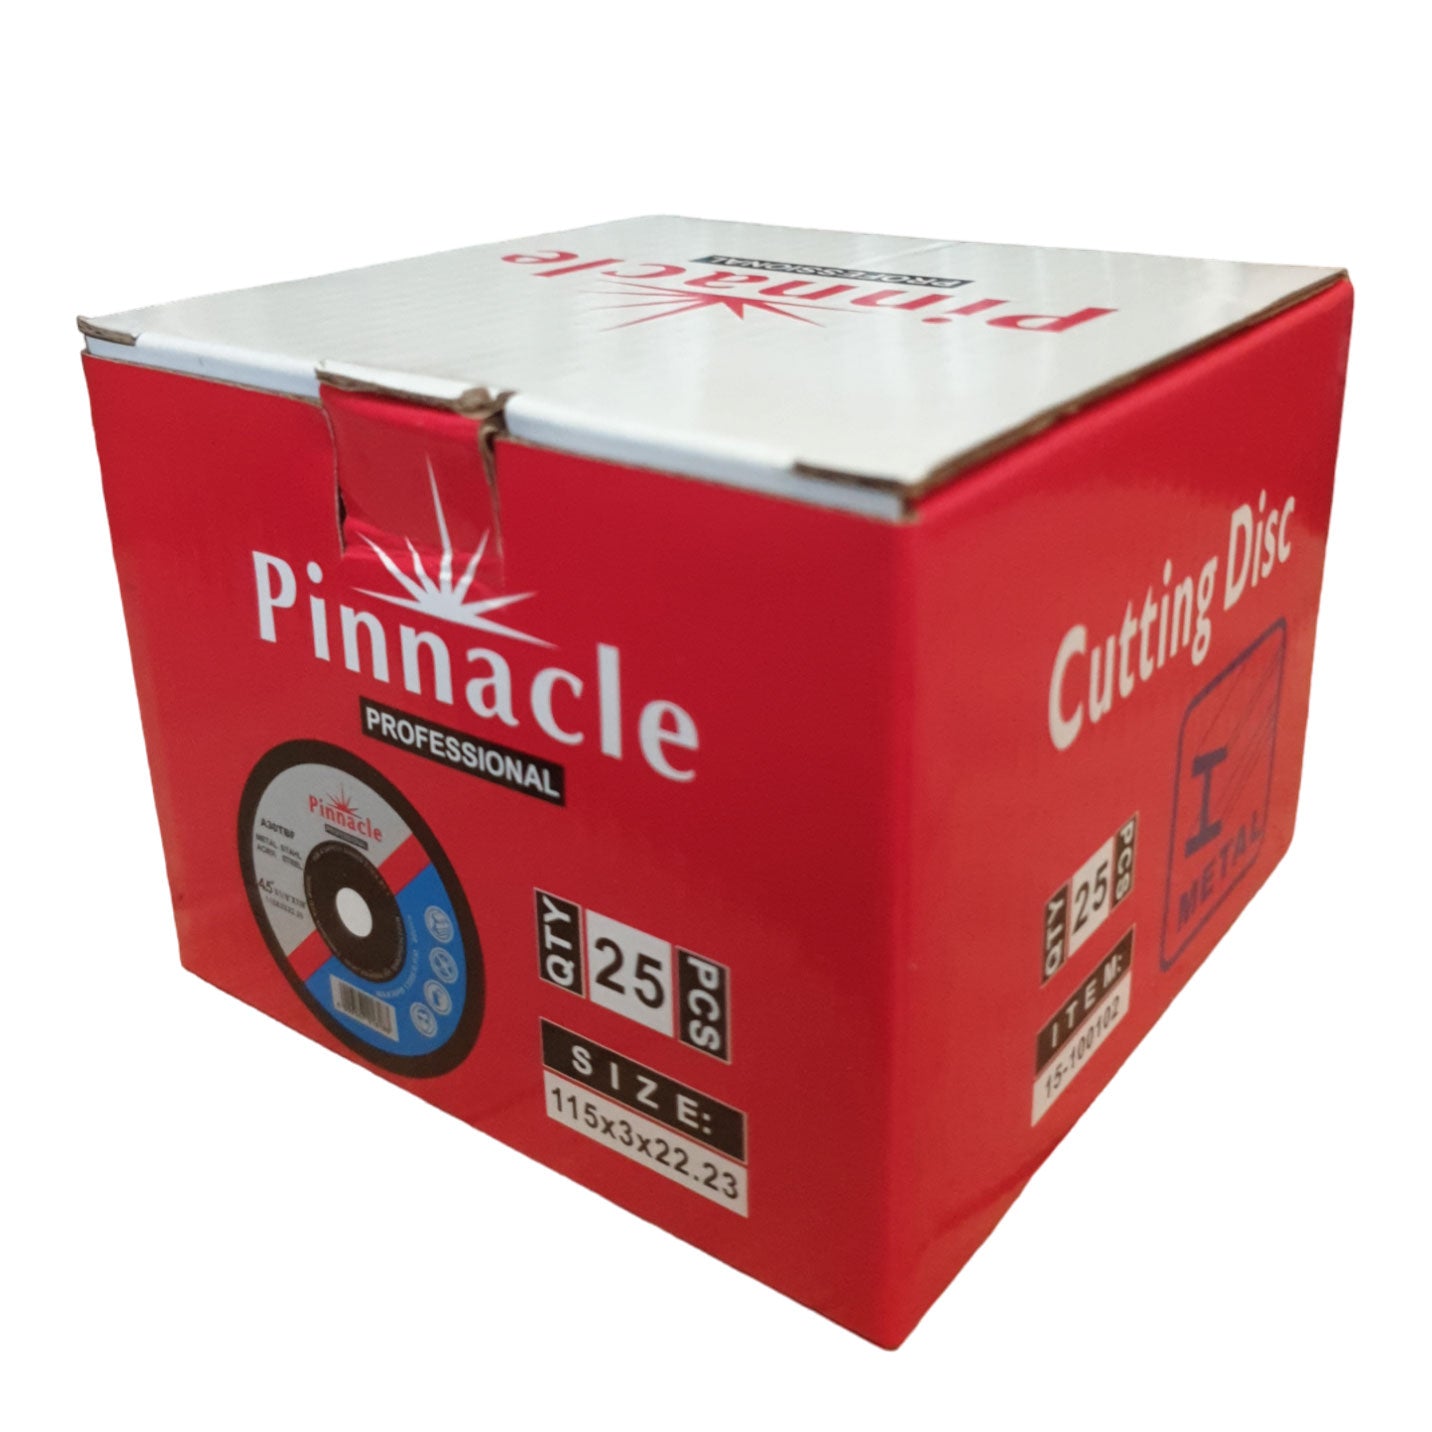 Box of 25 Pinnacle Steel Cutting Discs 115mm, bulk package for professional use, emphasizing quantity and quality for efficient metal cutting